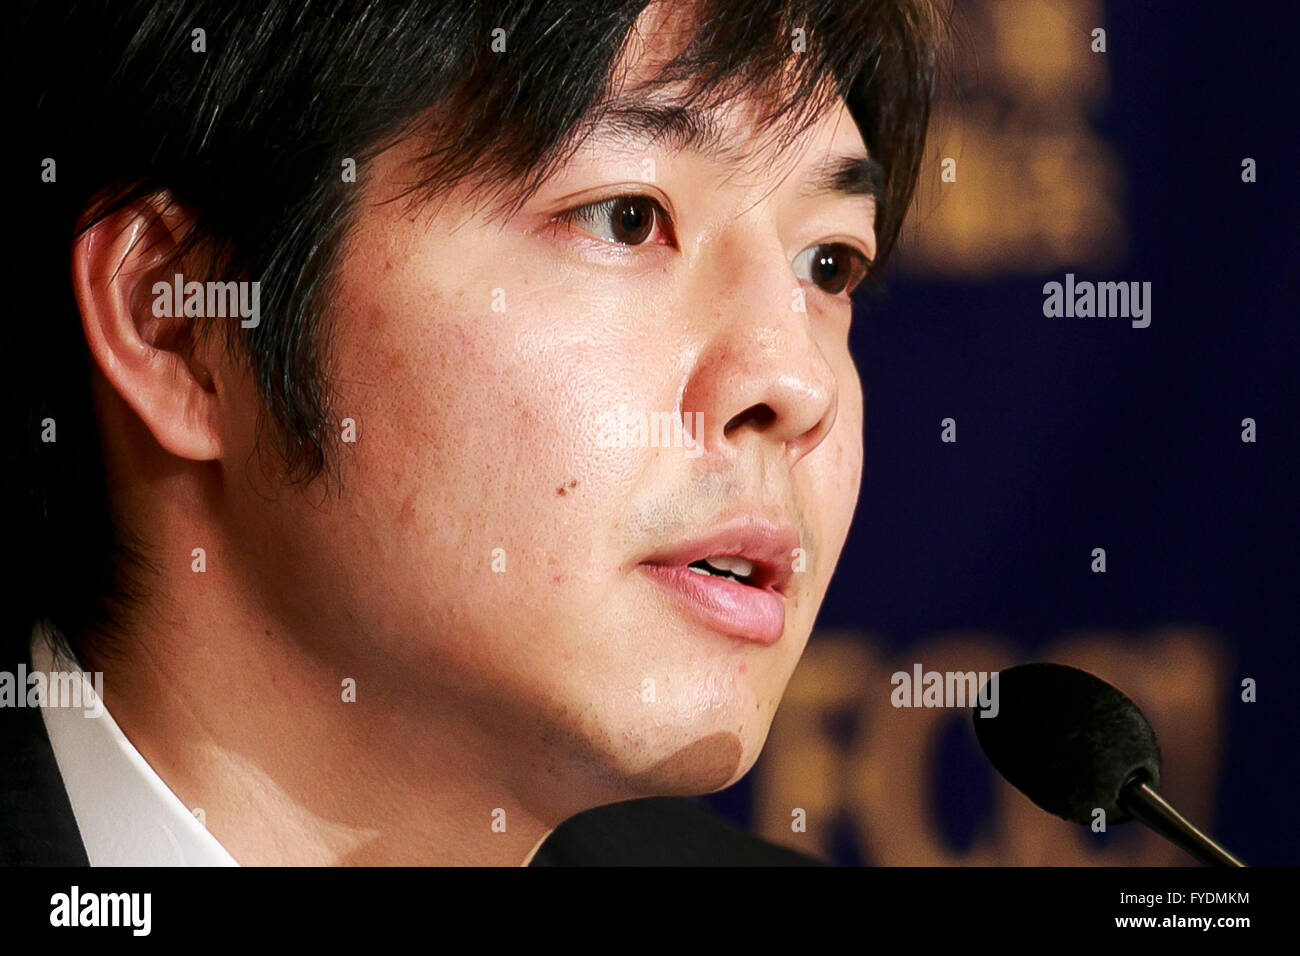 Naomichi Suzuki Mayor of Yubari city in Hokkaido speaks during a press conference at the Foreign Correspondents' Club of Japan on April 26, 2016, Tokyo, Japan. Suzuki, who at the age of 30 became Japan's youngest mayor in 2011, spoke about his ongoing challenges to revitalise the bankrupt economy of Yubari. Faced with a shrinking population and the decline of the local coal-mining industry Suzuki turned to renewable energy to try to boost the local economy. He was re-elected in 2015 and is continuing to work to revitalize the city. © Rodrigo Reyes Marin/AFLO/Alamy Live News Stock Photo